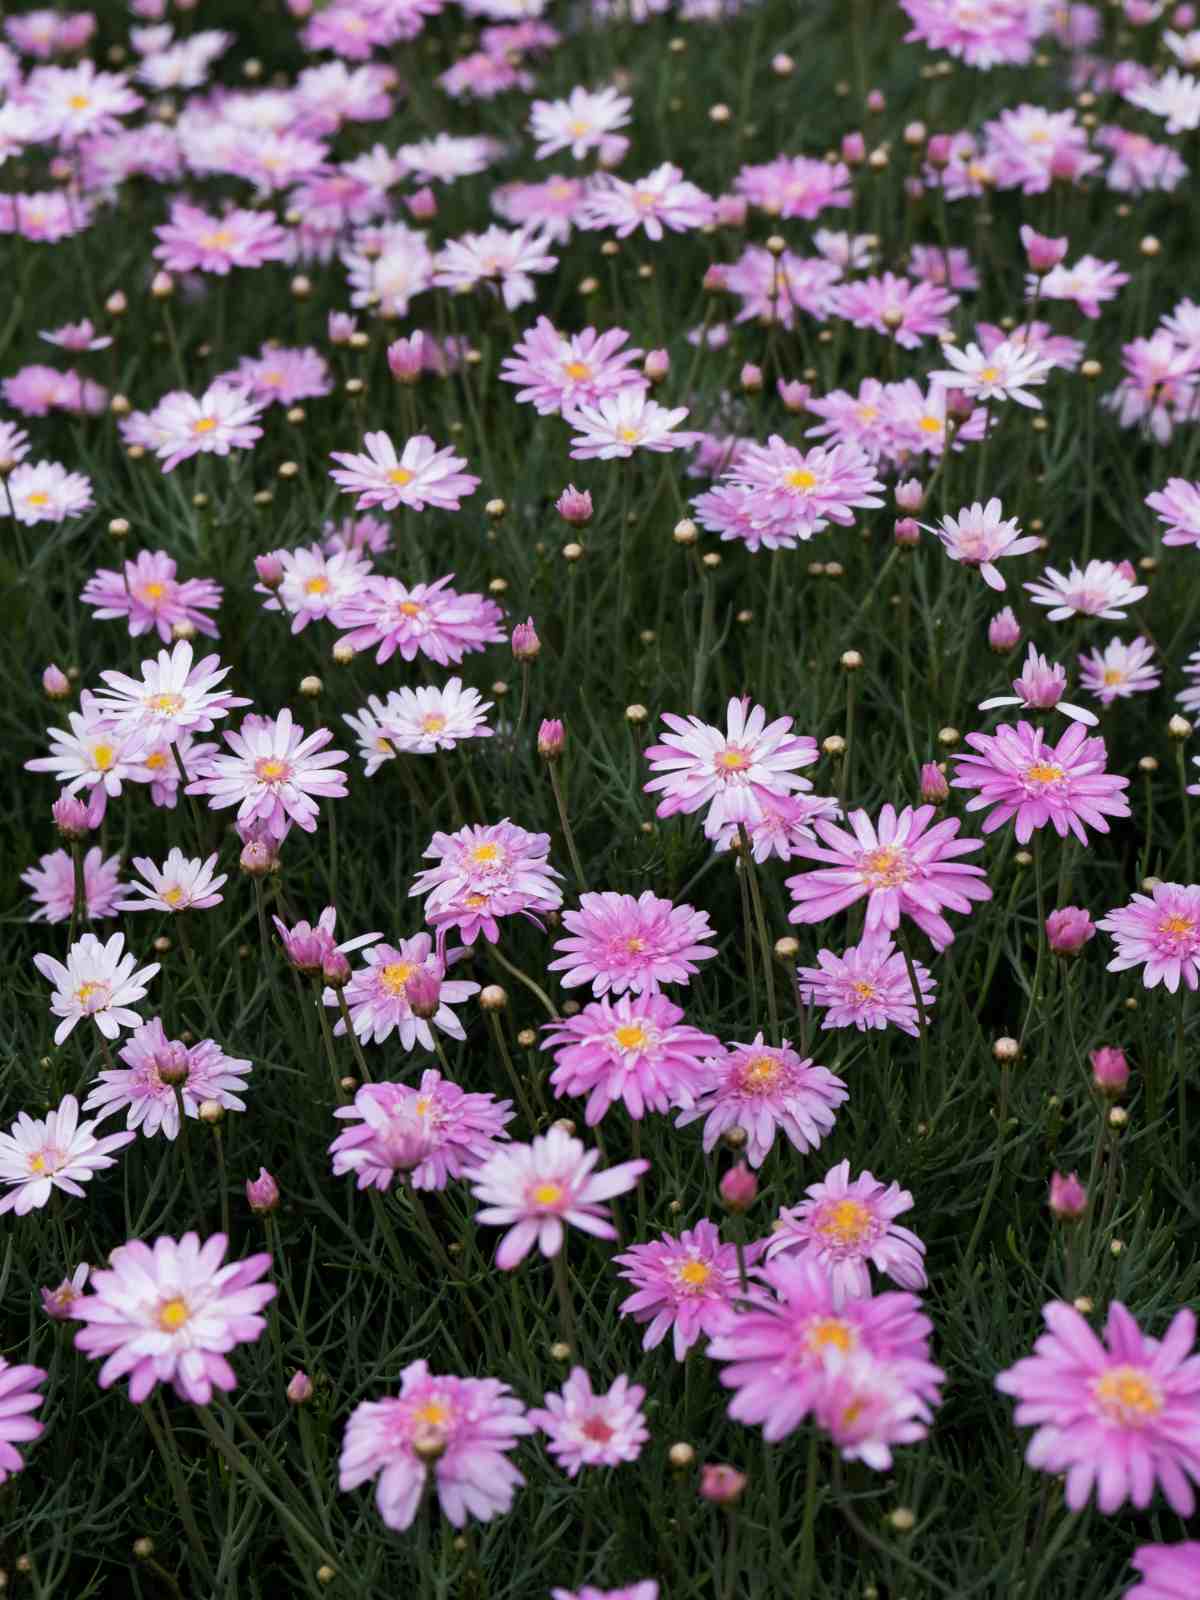 How to Grow and Care for African Daisies